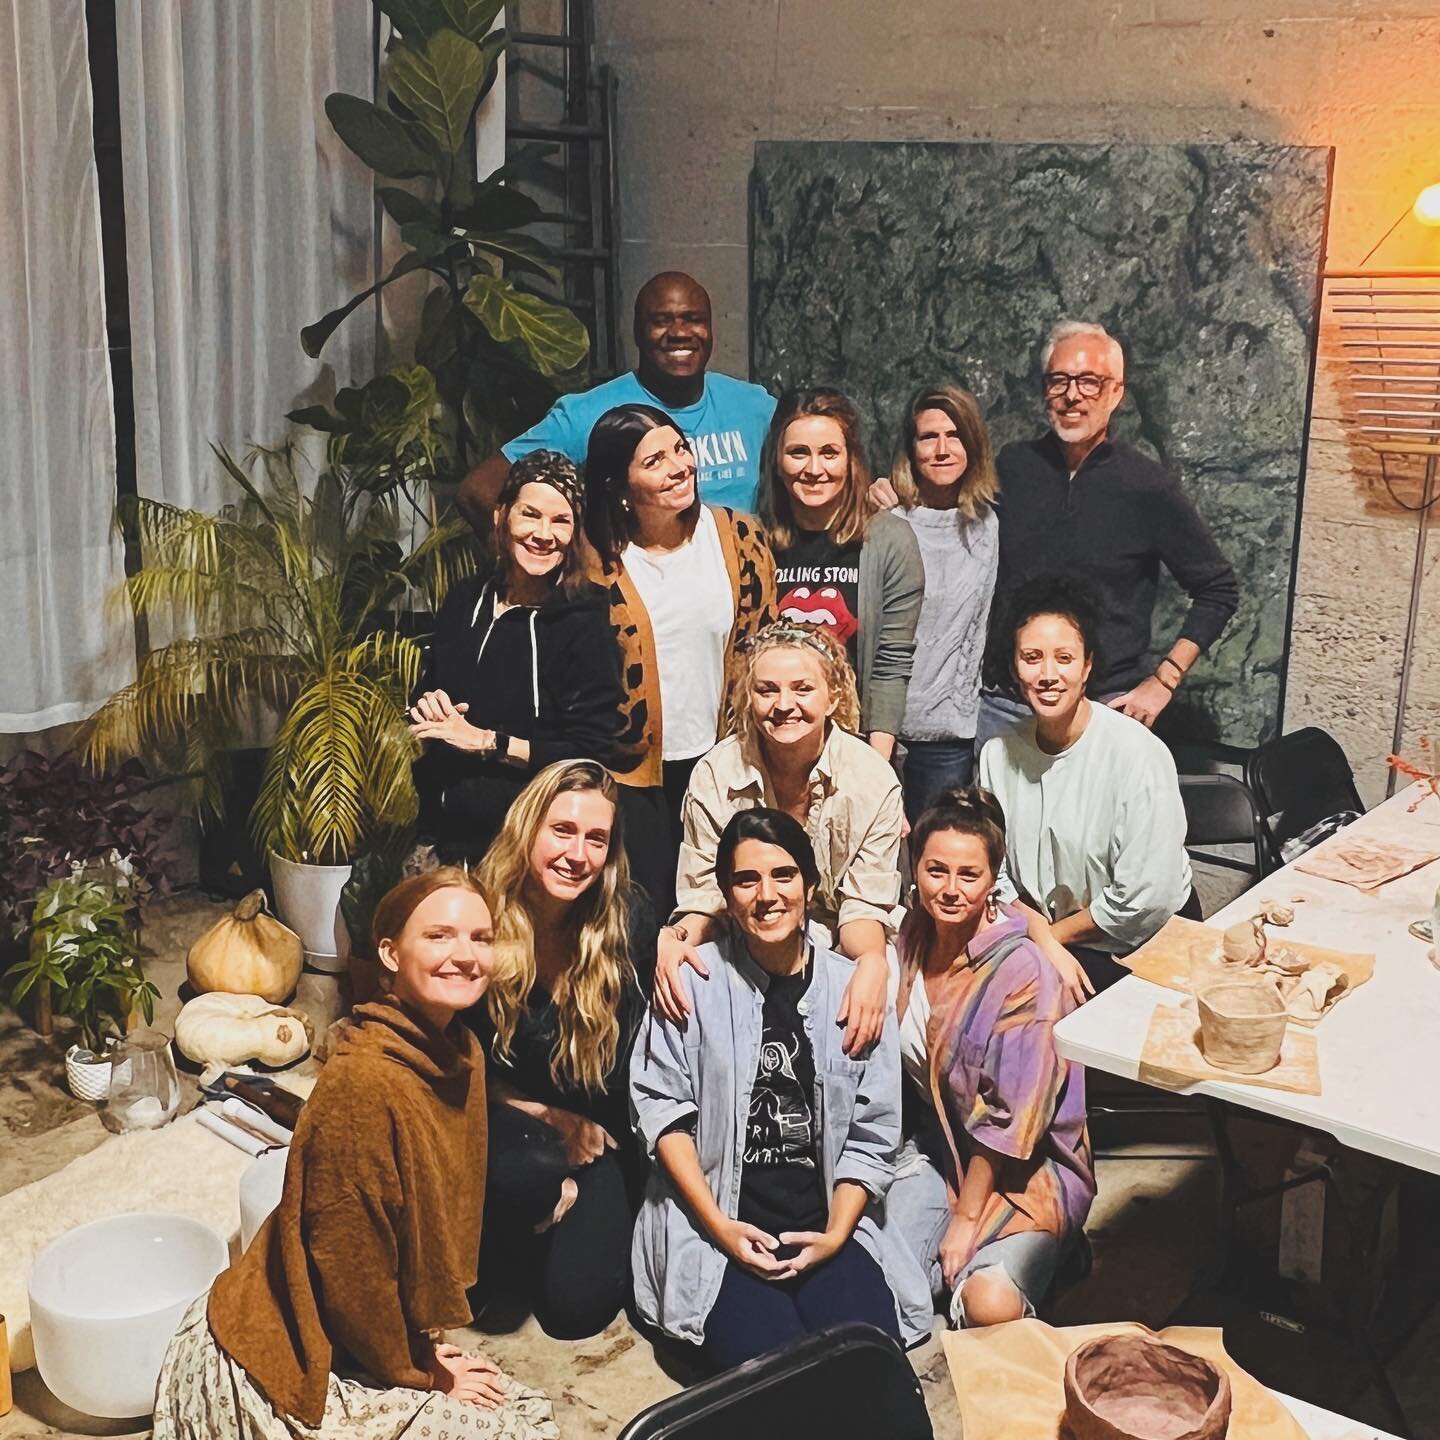 My heart is bursting with joy! I&rsquo;m so happy to share my practices and my home with beautiful souls. Thank you all for making the ceramics play so easy and fun!